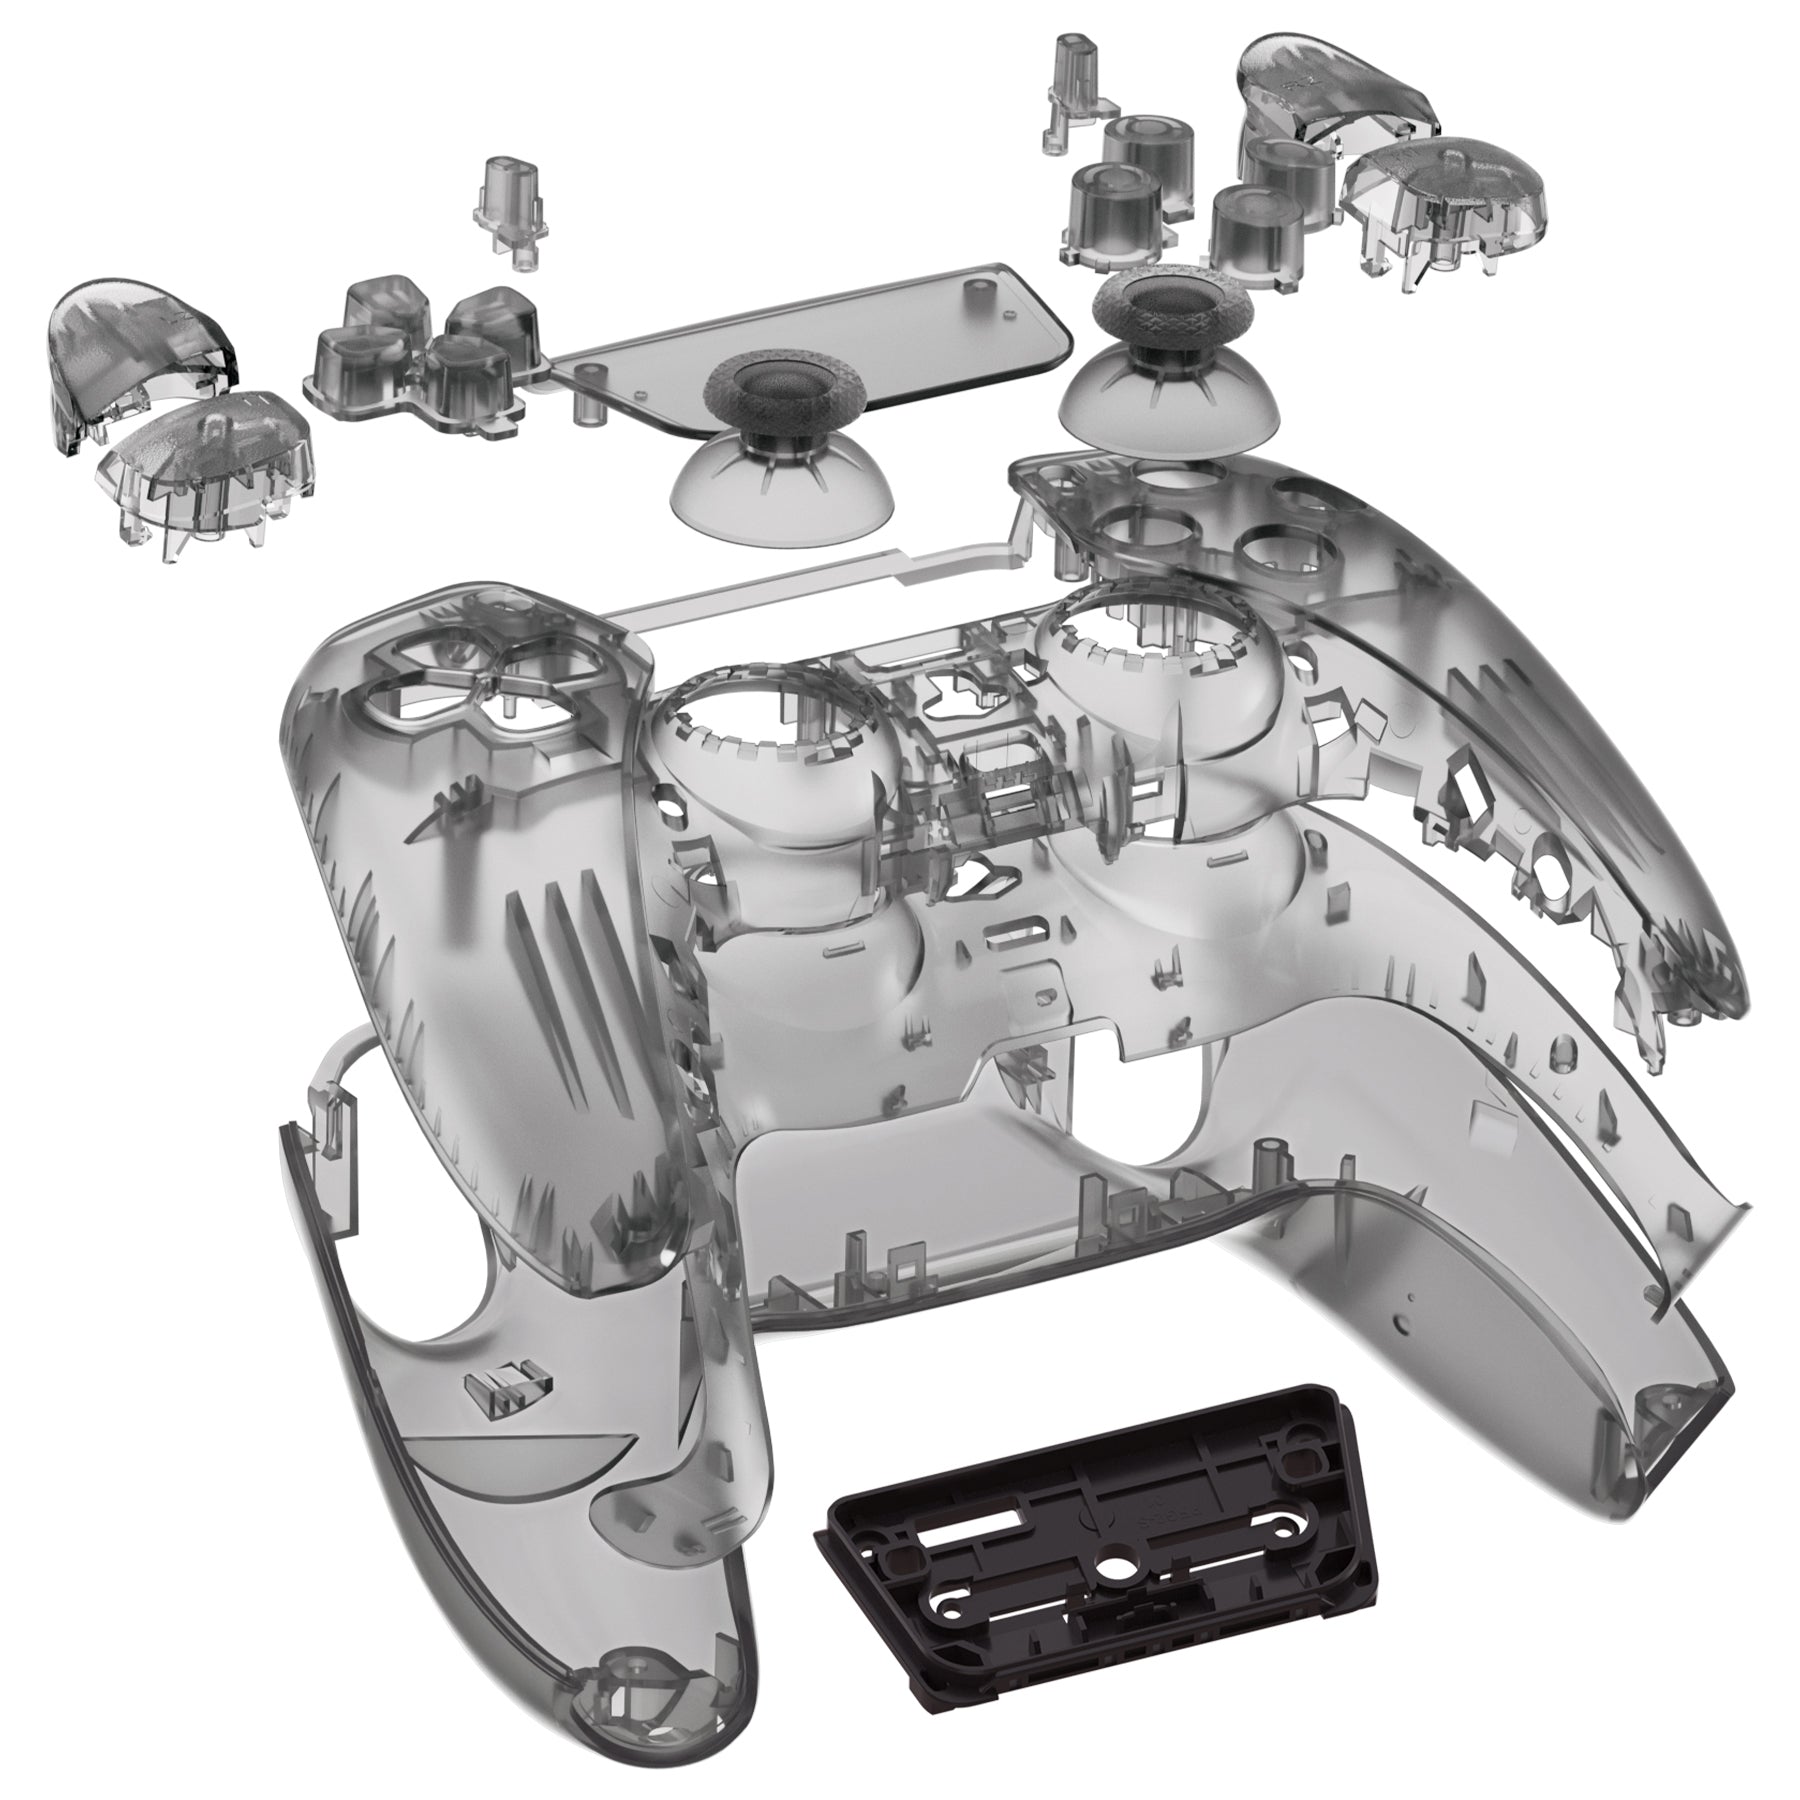 eXtremeRate Retail Full Set Housing Shell with Buttons Touchpad Cover, Clear Black Custom Replacement Decorative Trim Shell Front Back Plates Compatible with ps5 Controller BDM-010 BDM-020 - Controller NOT Included - QPFM5007G2